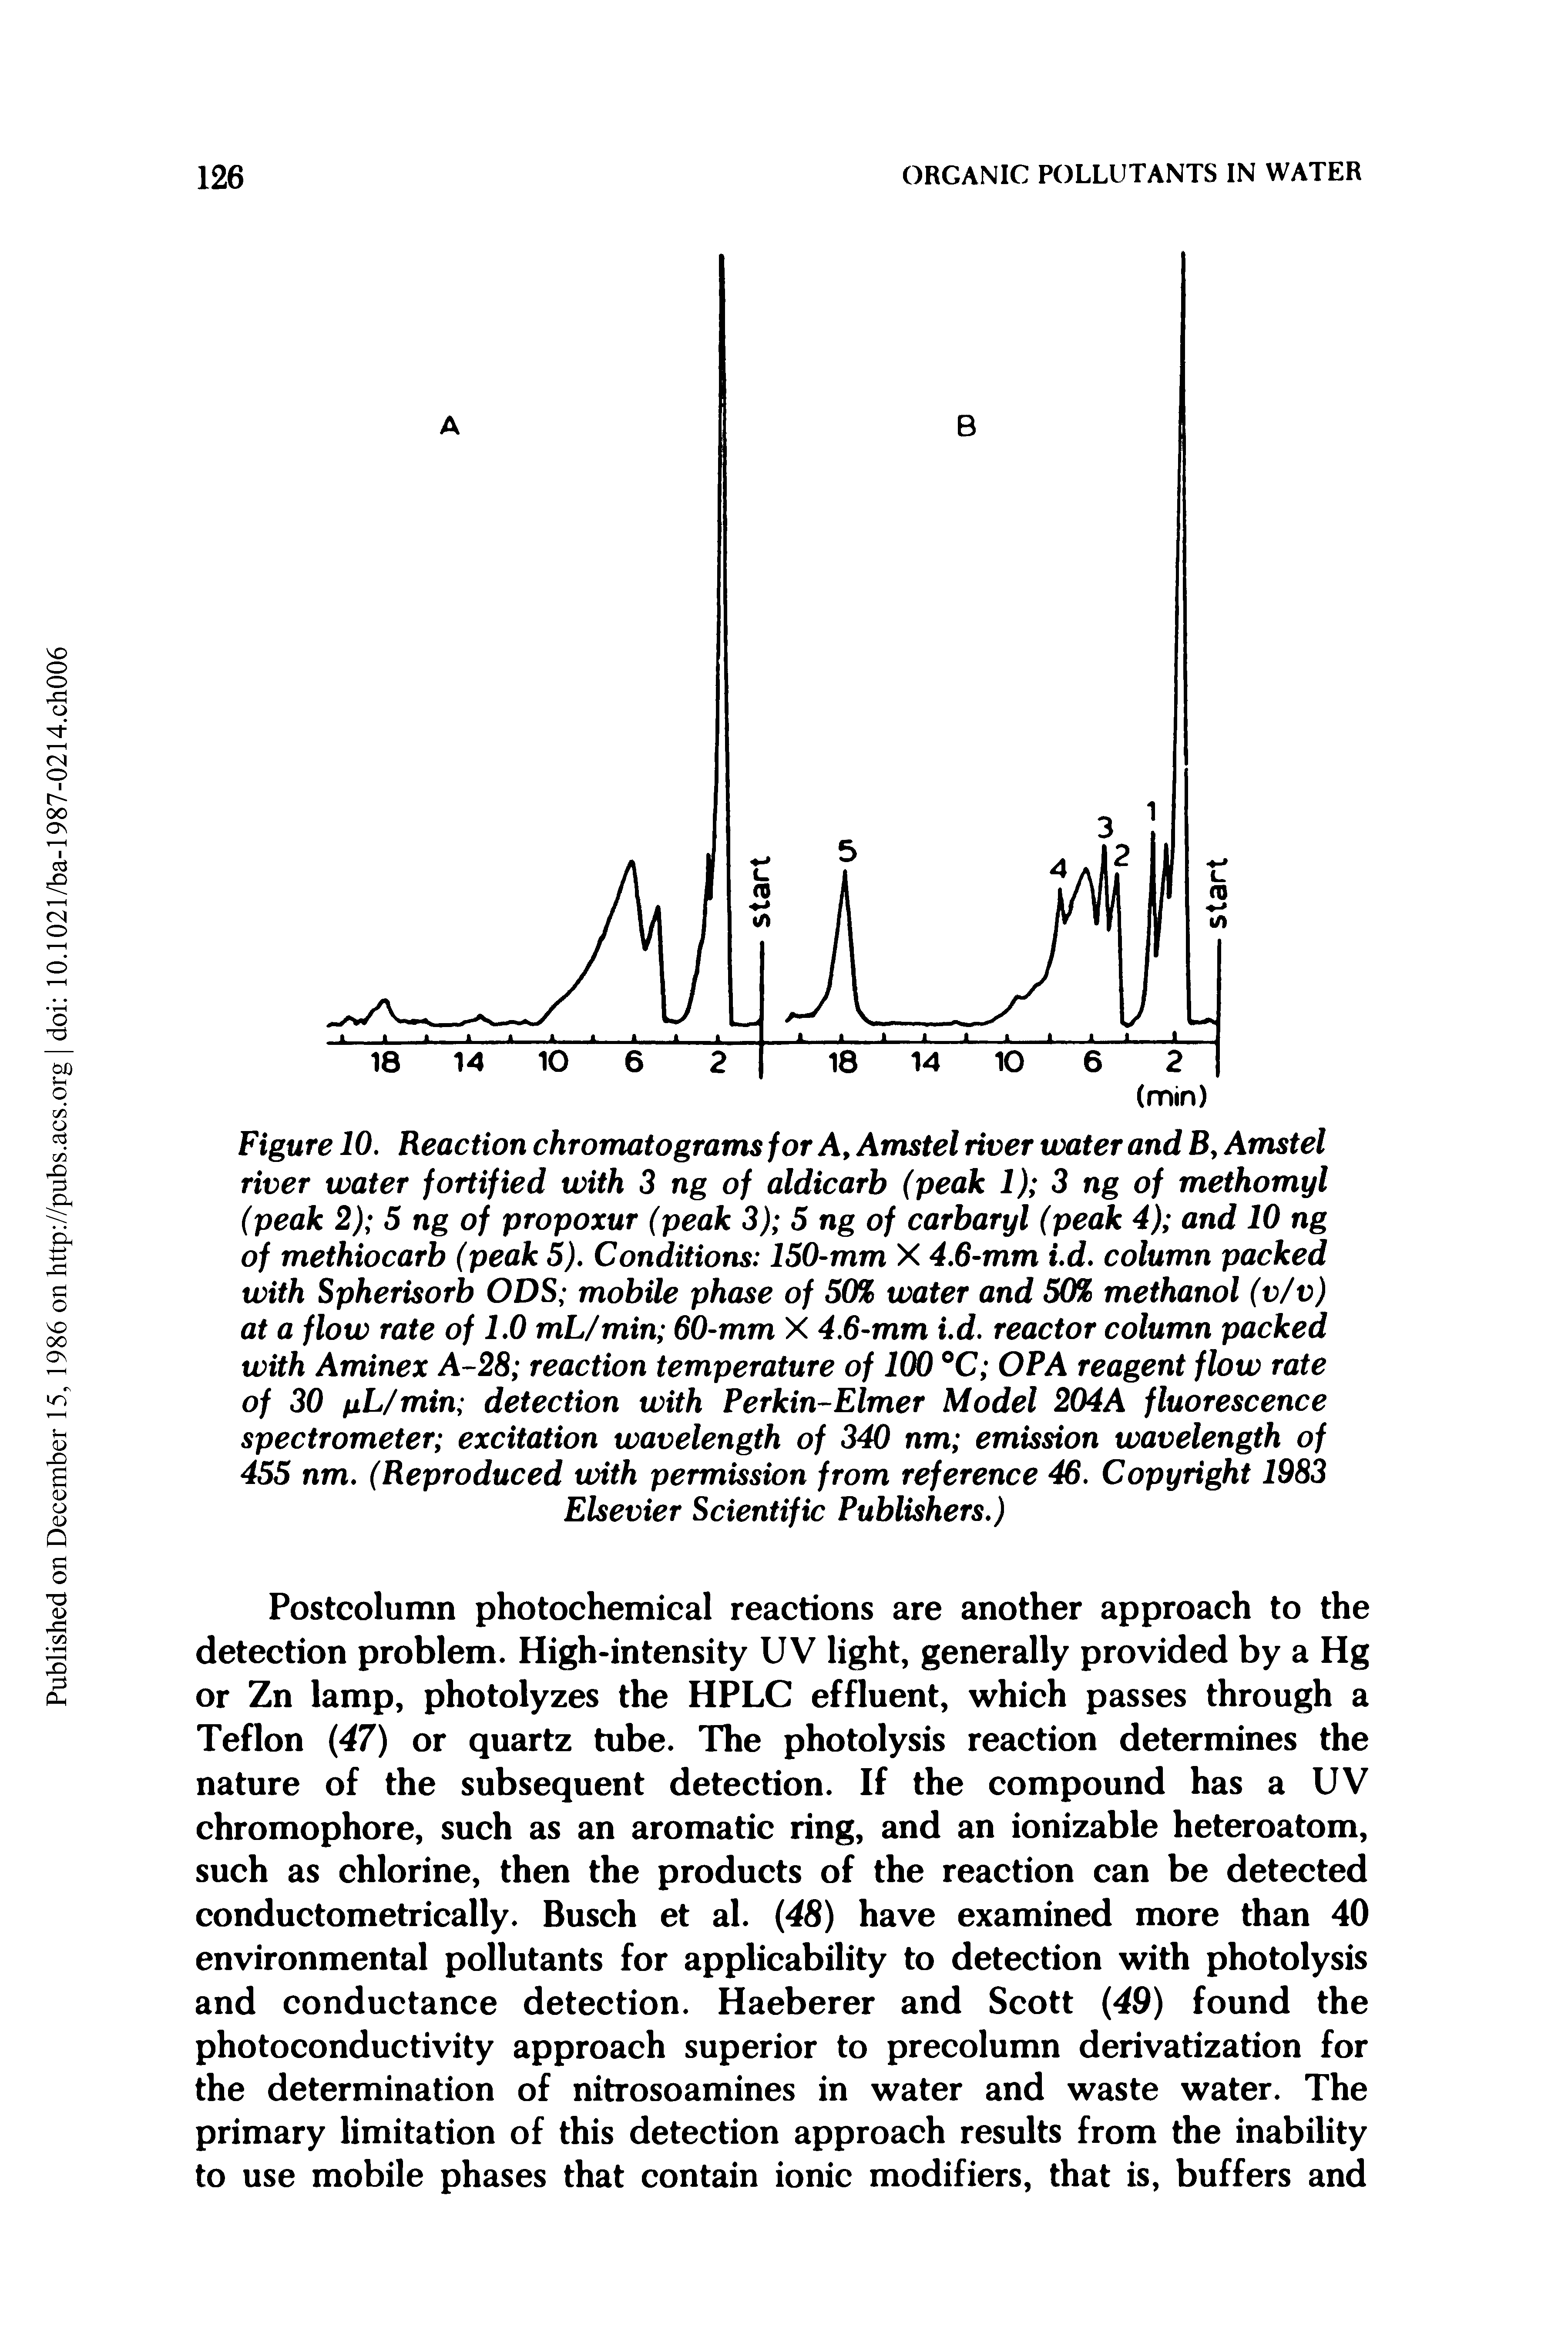 Figure 10. Reaction chromatograms for A, Amstel river water and B, Amstel river water fortified with 3 ng of aldicarb (peak 1) 3 ng of methomyl (peak 2) 5 ng of propoxur (peak 3) 5 ng of carbaryl (peak 4) and 10 ng of methiocarb (peak 5). Conditions 150-mm X 4.6-mm i.d. column packed with Spherisorb ODS mobile phase of 50% water and 50% methanol (v/v) at a flow rate of 1.0 mL/min 60-mm X 4.6-mm i.d. reactor column packed with Aminex A-28 reaction temperature of 100 °C OF A reagent flow rate of 30 pL/min detection with Perkin-Elmer Model 204A fluorescence spectrometer excitation wavelength of 340 nm emission wavelength of 455 nm. (Reproduced with permission from reference 46. Copyright 1983 Elsevier Scientific Publishers.)...